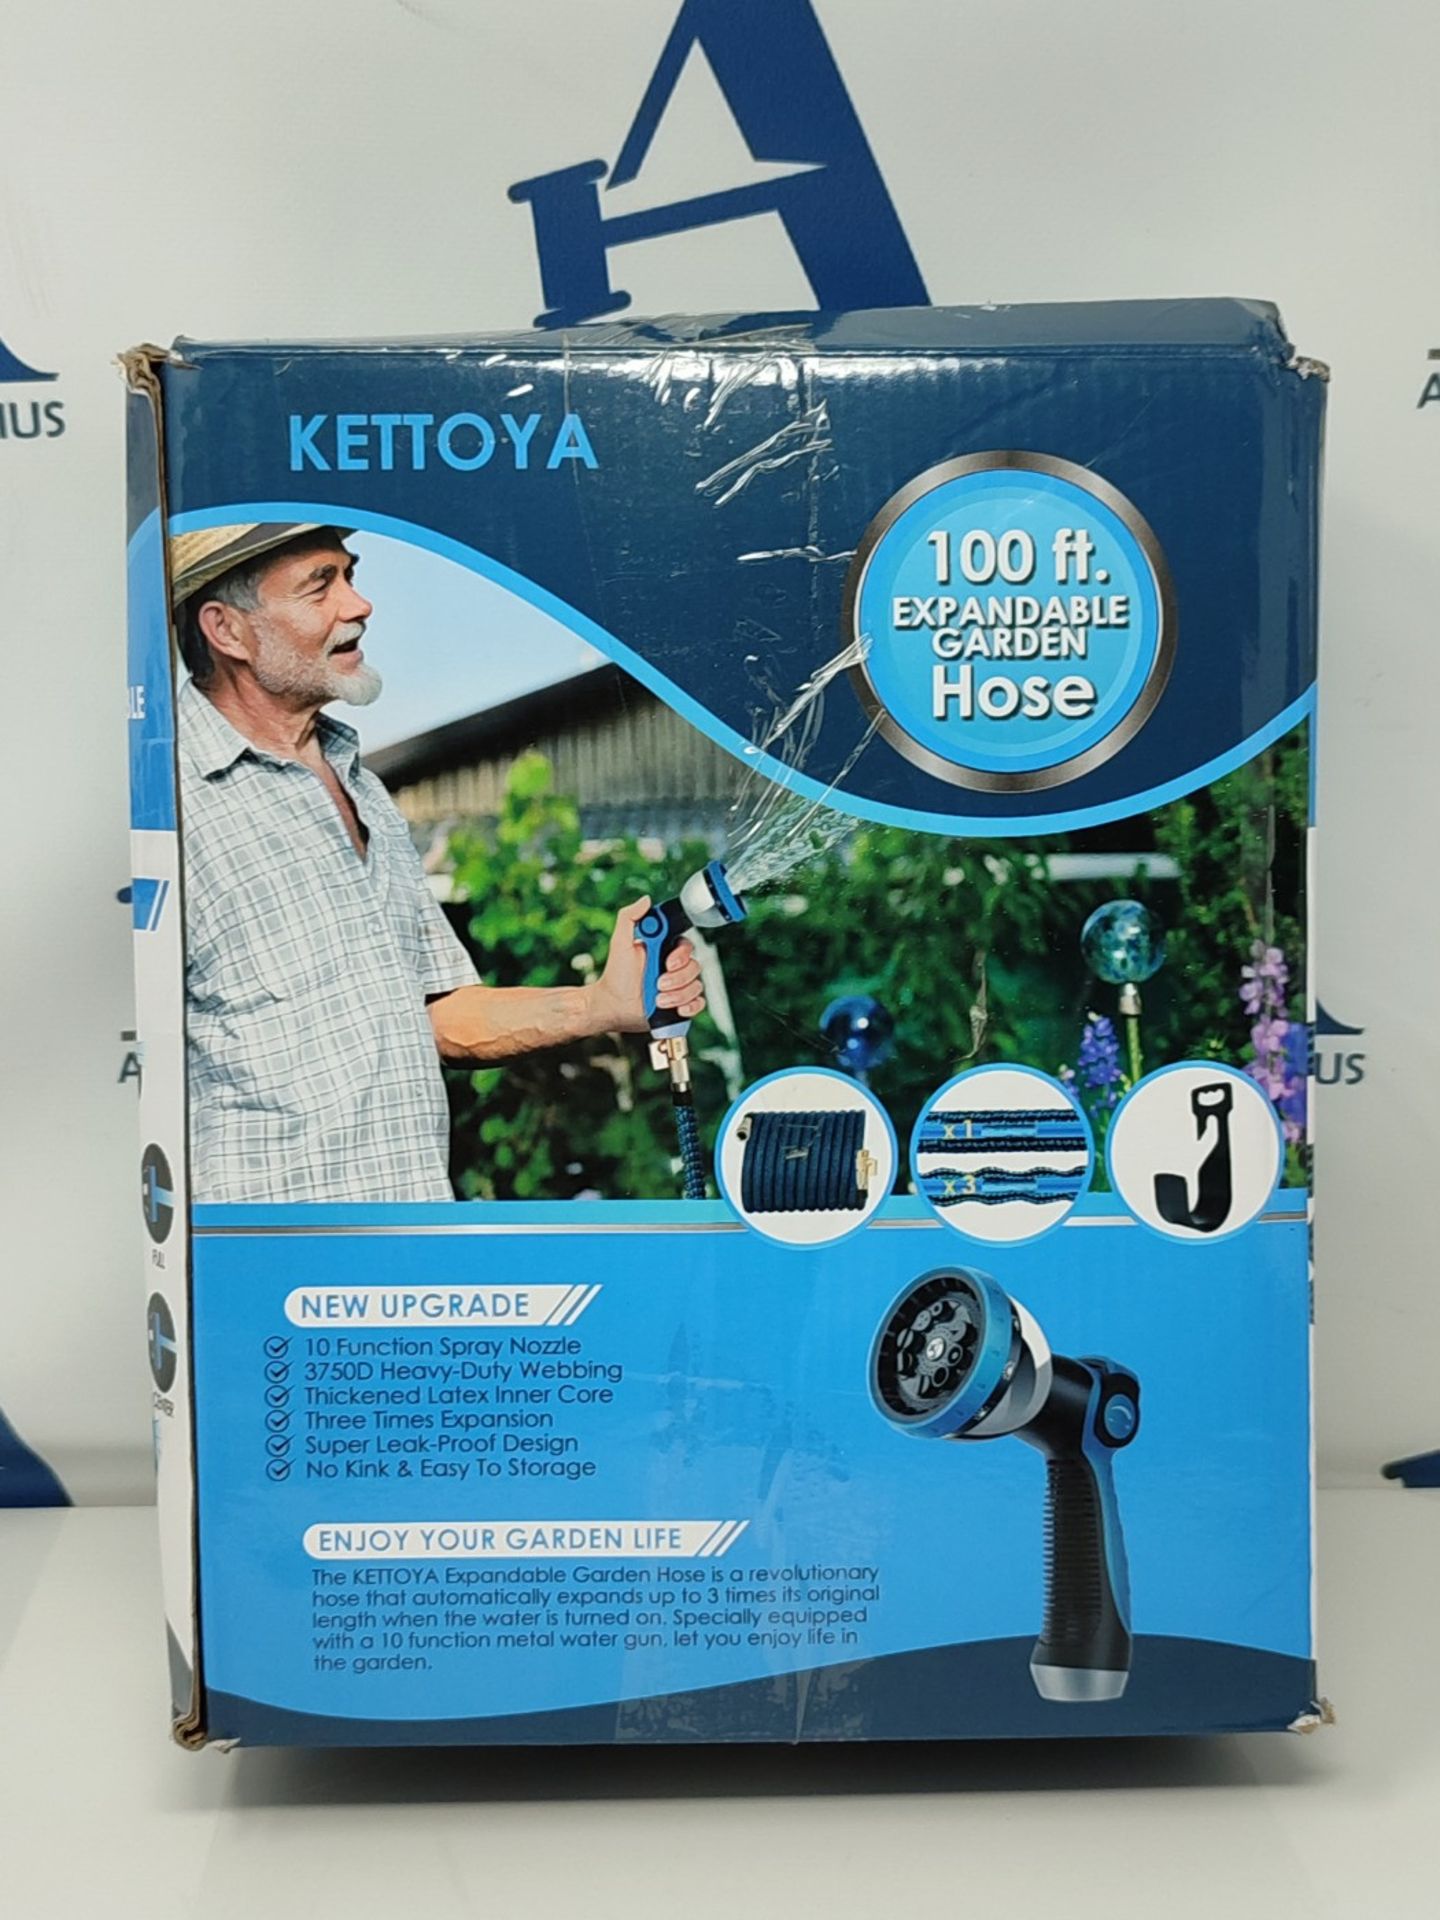 KETTOYA 100FT Expandable Garden Hose, Flexible Water Hose with 10-Pattern Spray Nozzle - Image 3 of 10